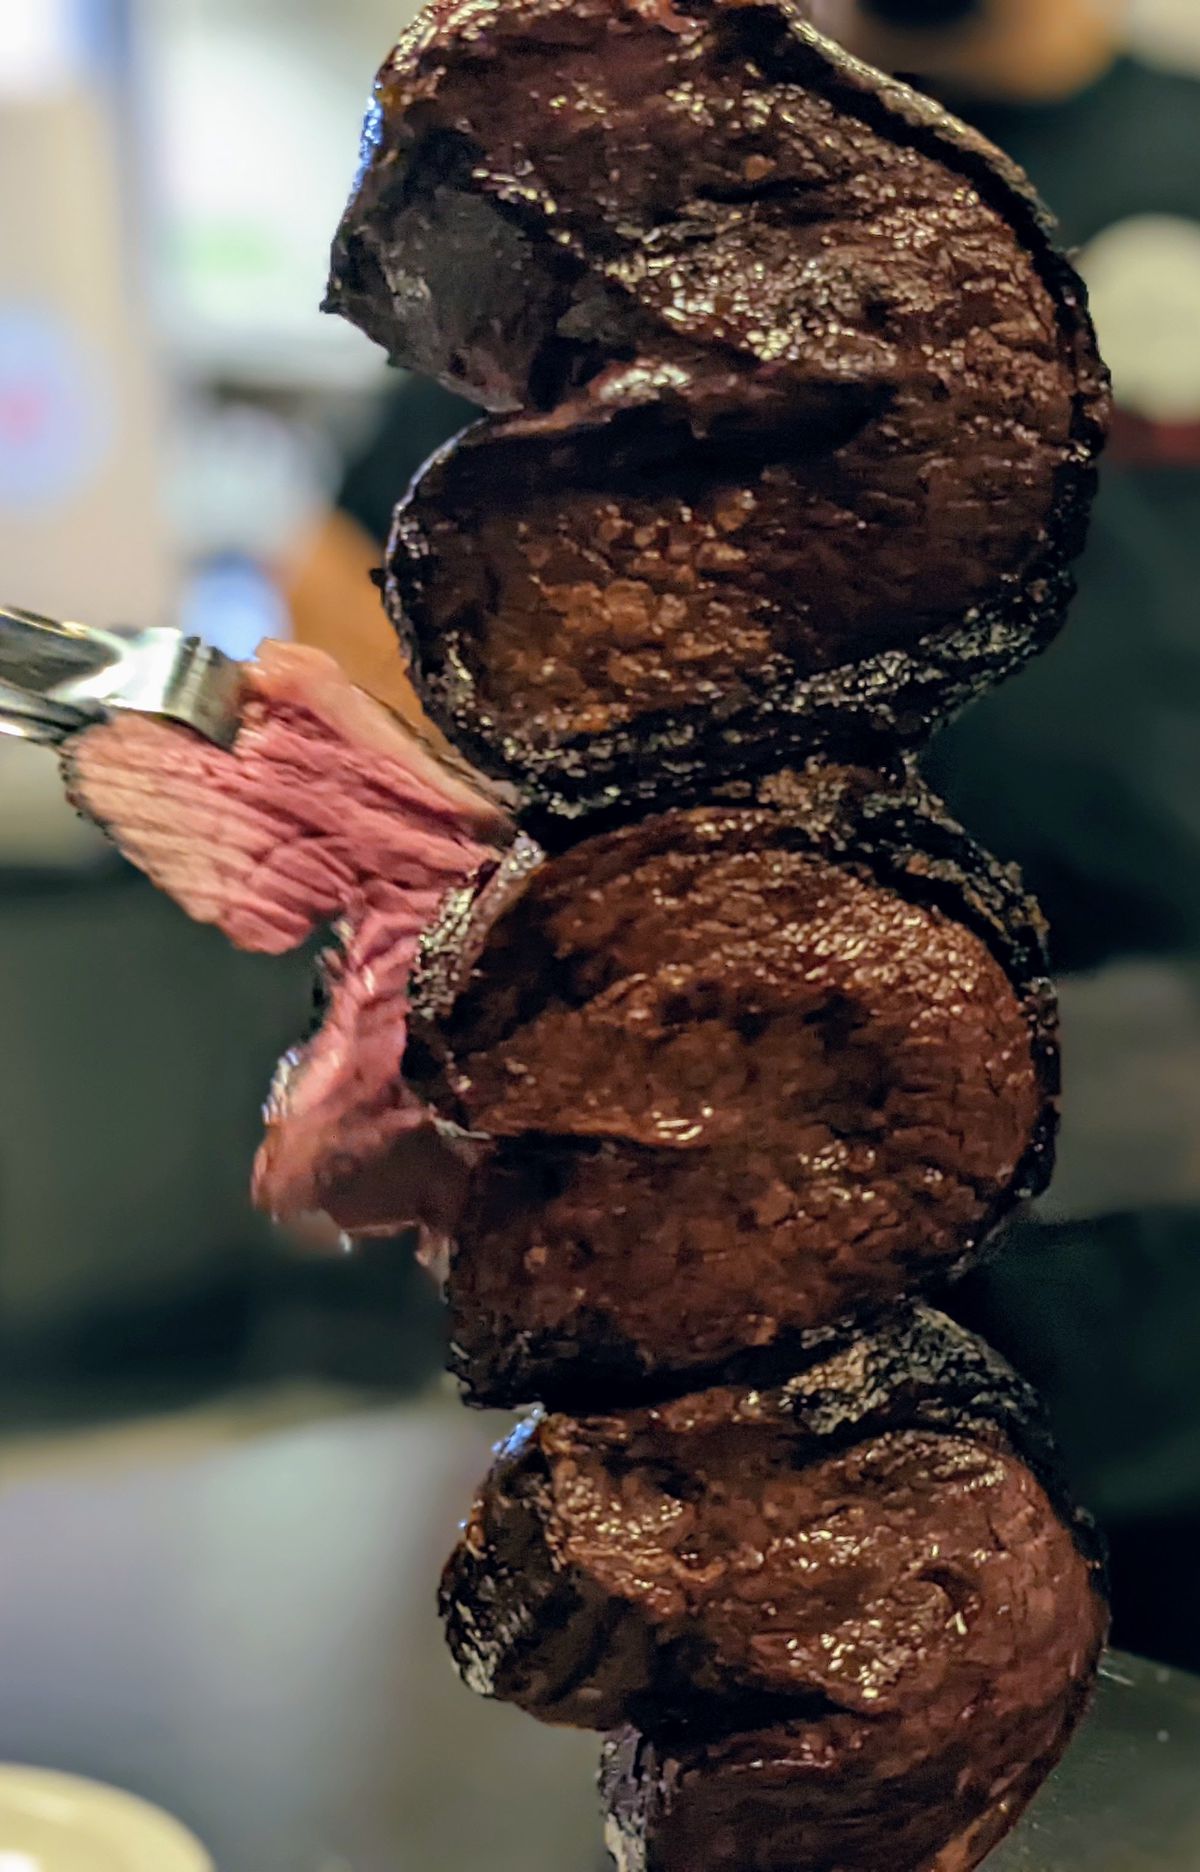 A pair of tongs pulls out a slice of rare meat from a skewer.